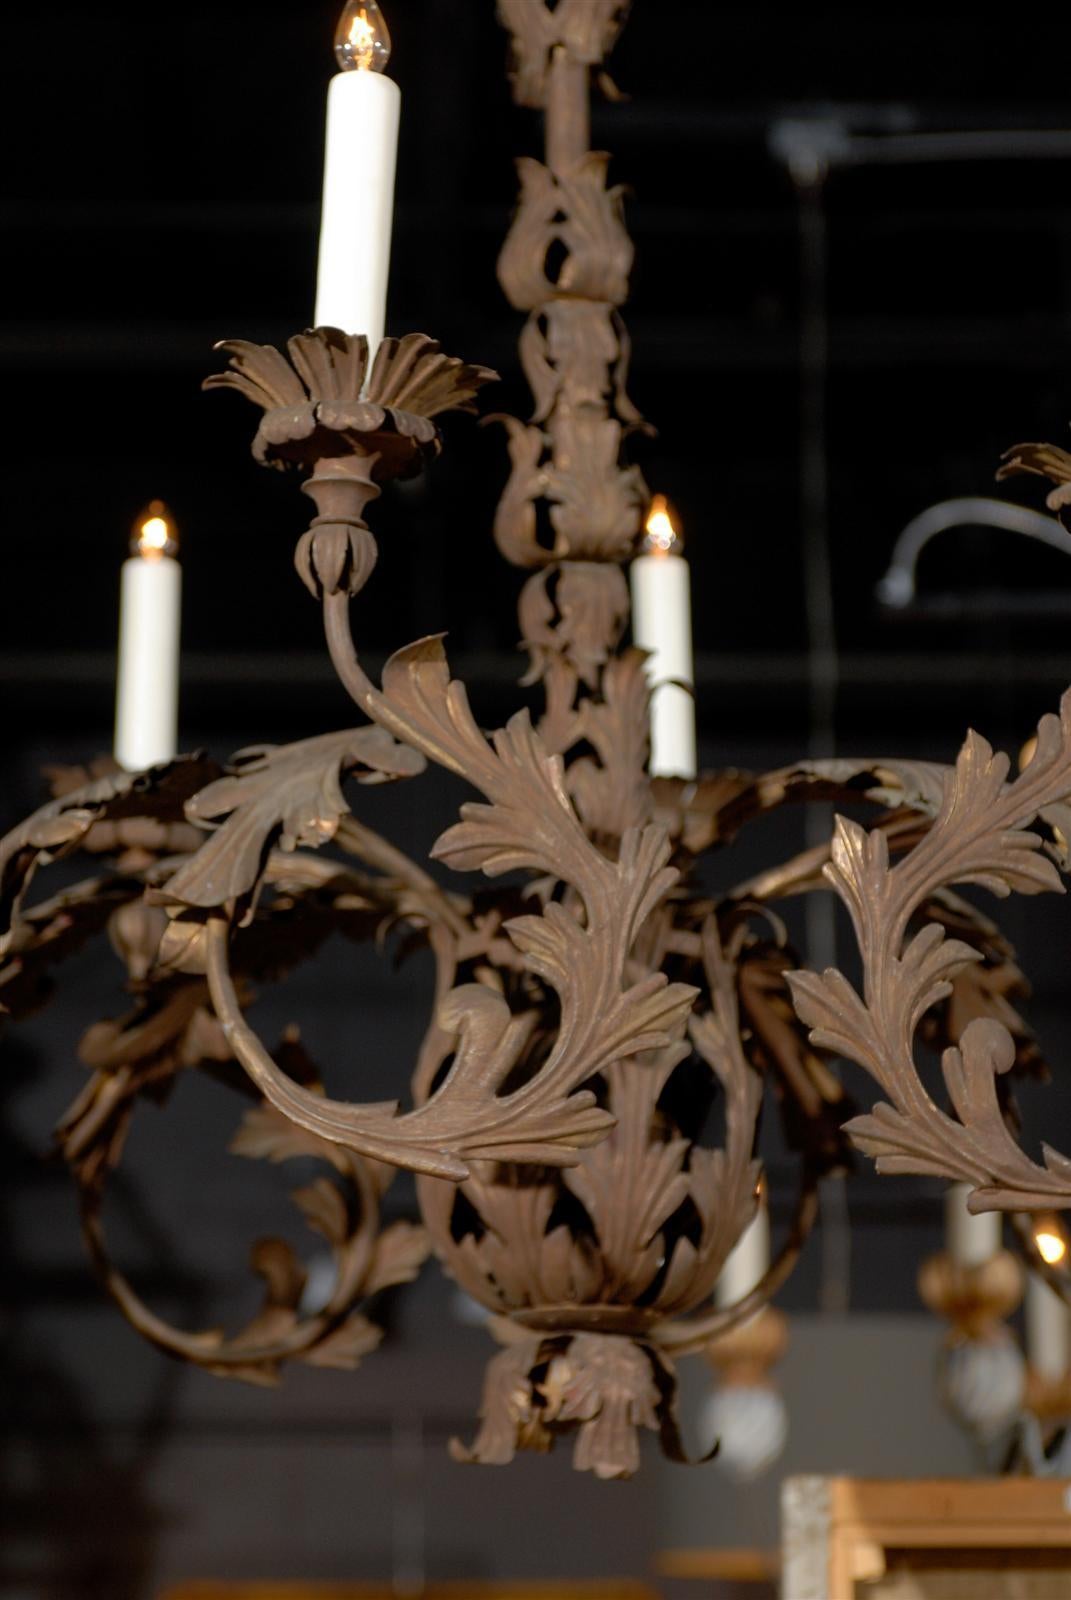 Italian 1890s Wrought Iron Eight-Light Chandelier with Scrolling Acanthus Leaves (19. Jahrhundert) im Angebot